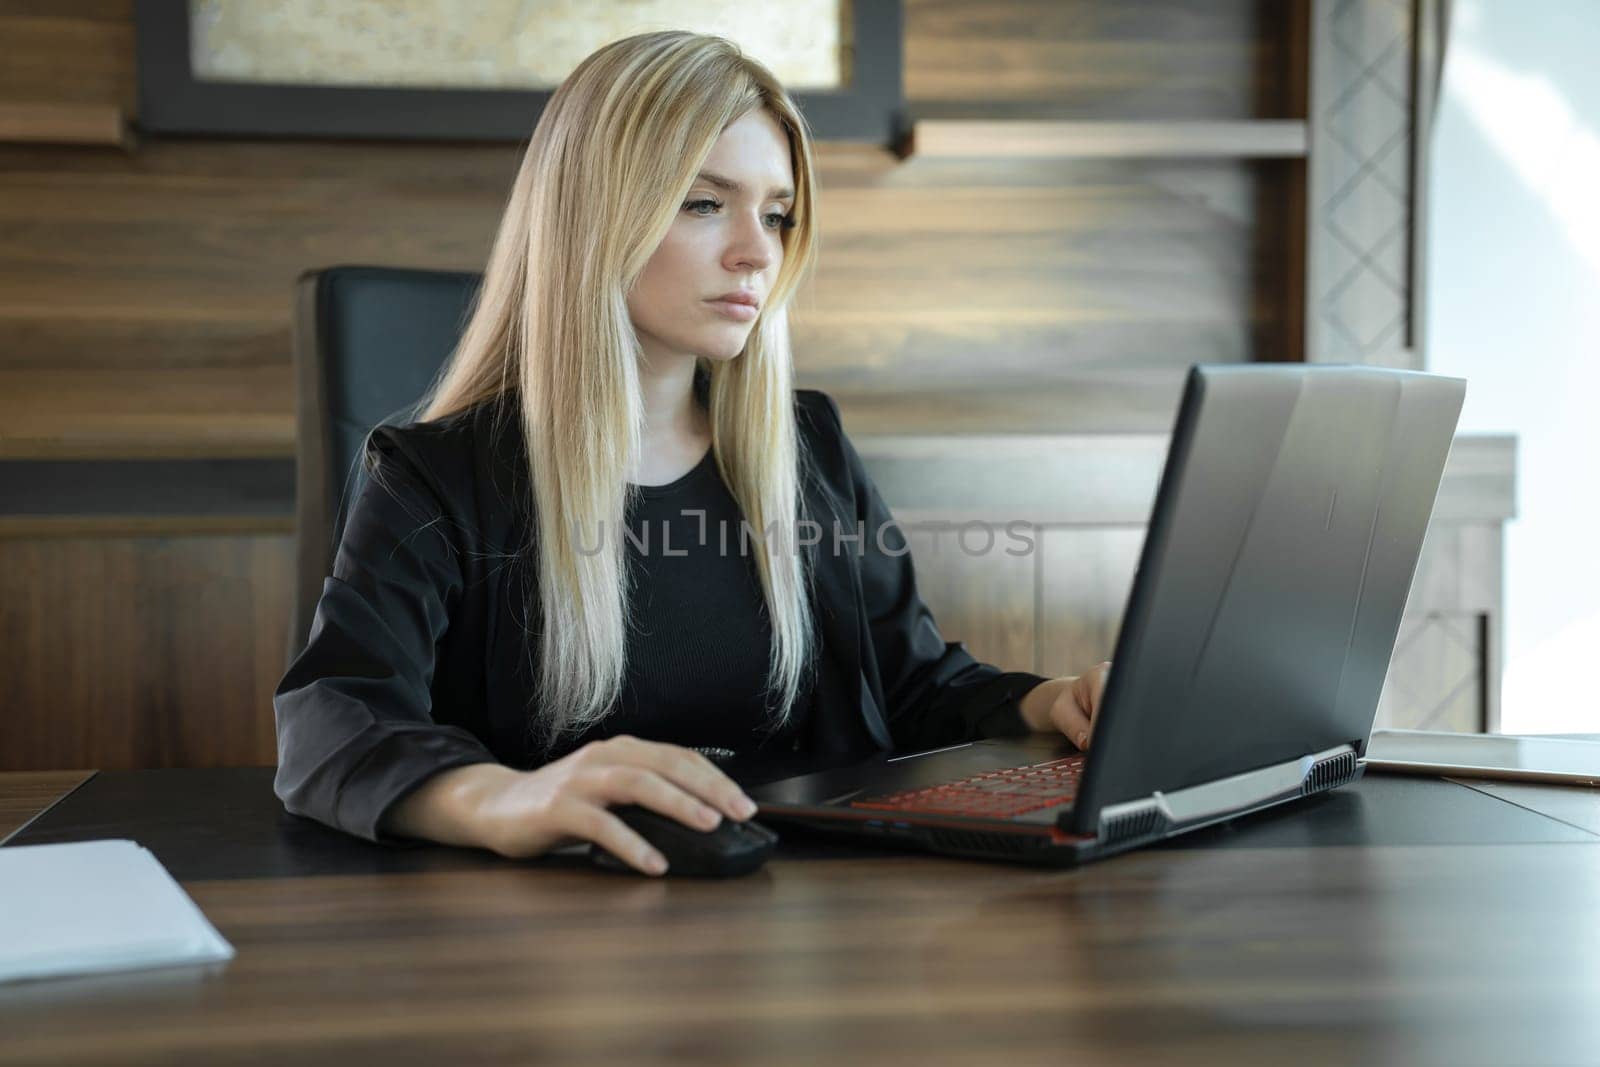 Blonde girl in business clothes sits in front of laptop in office and works intently, concept of online education and work.